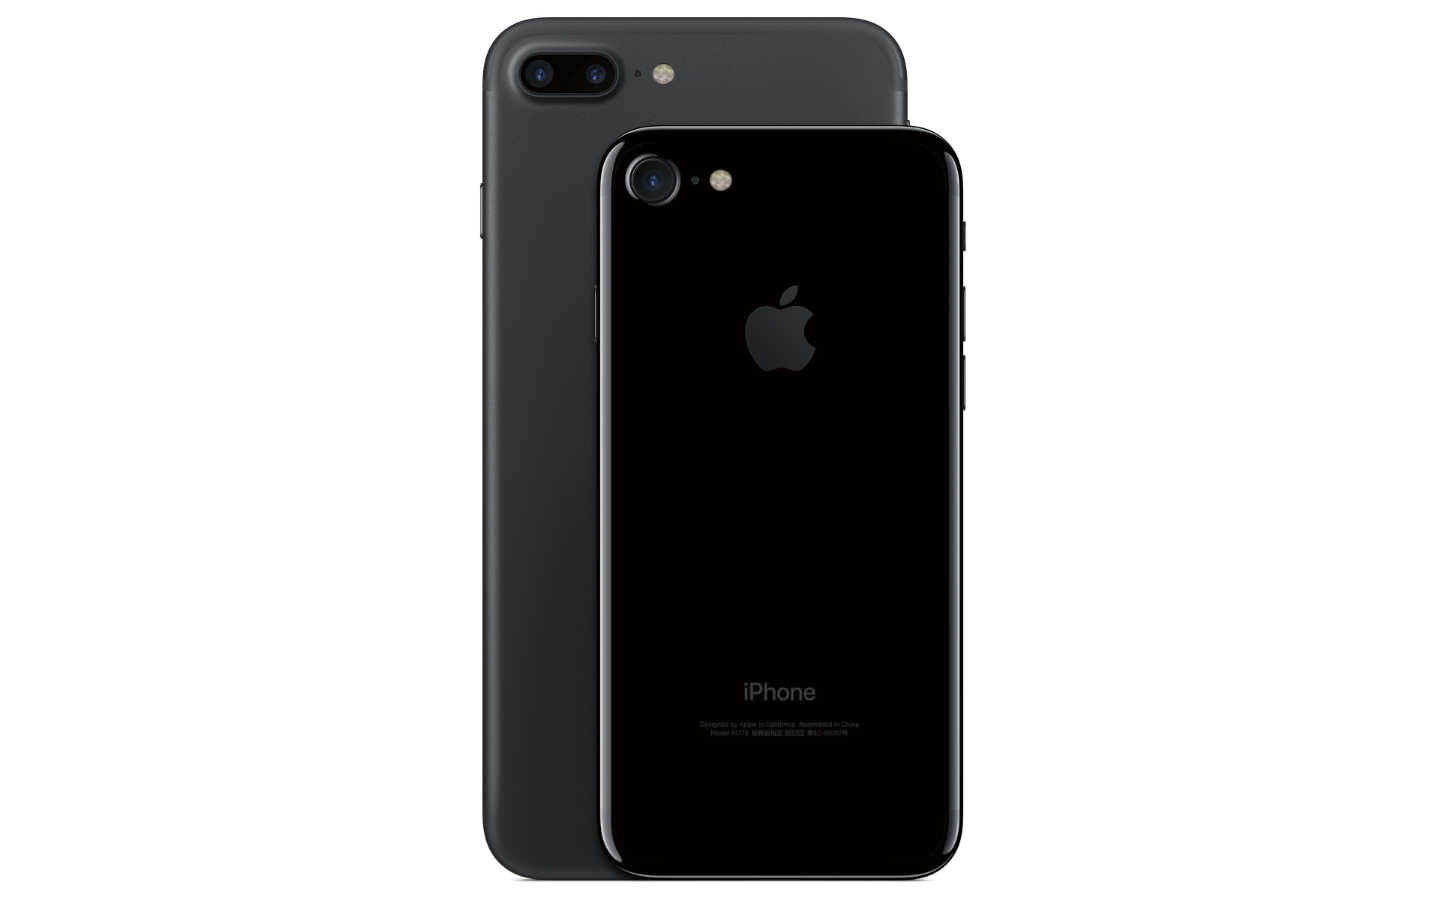 iphone-7-and-7-plus.jpg